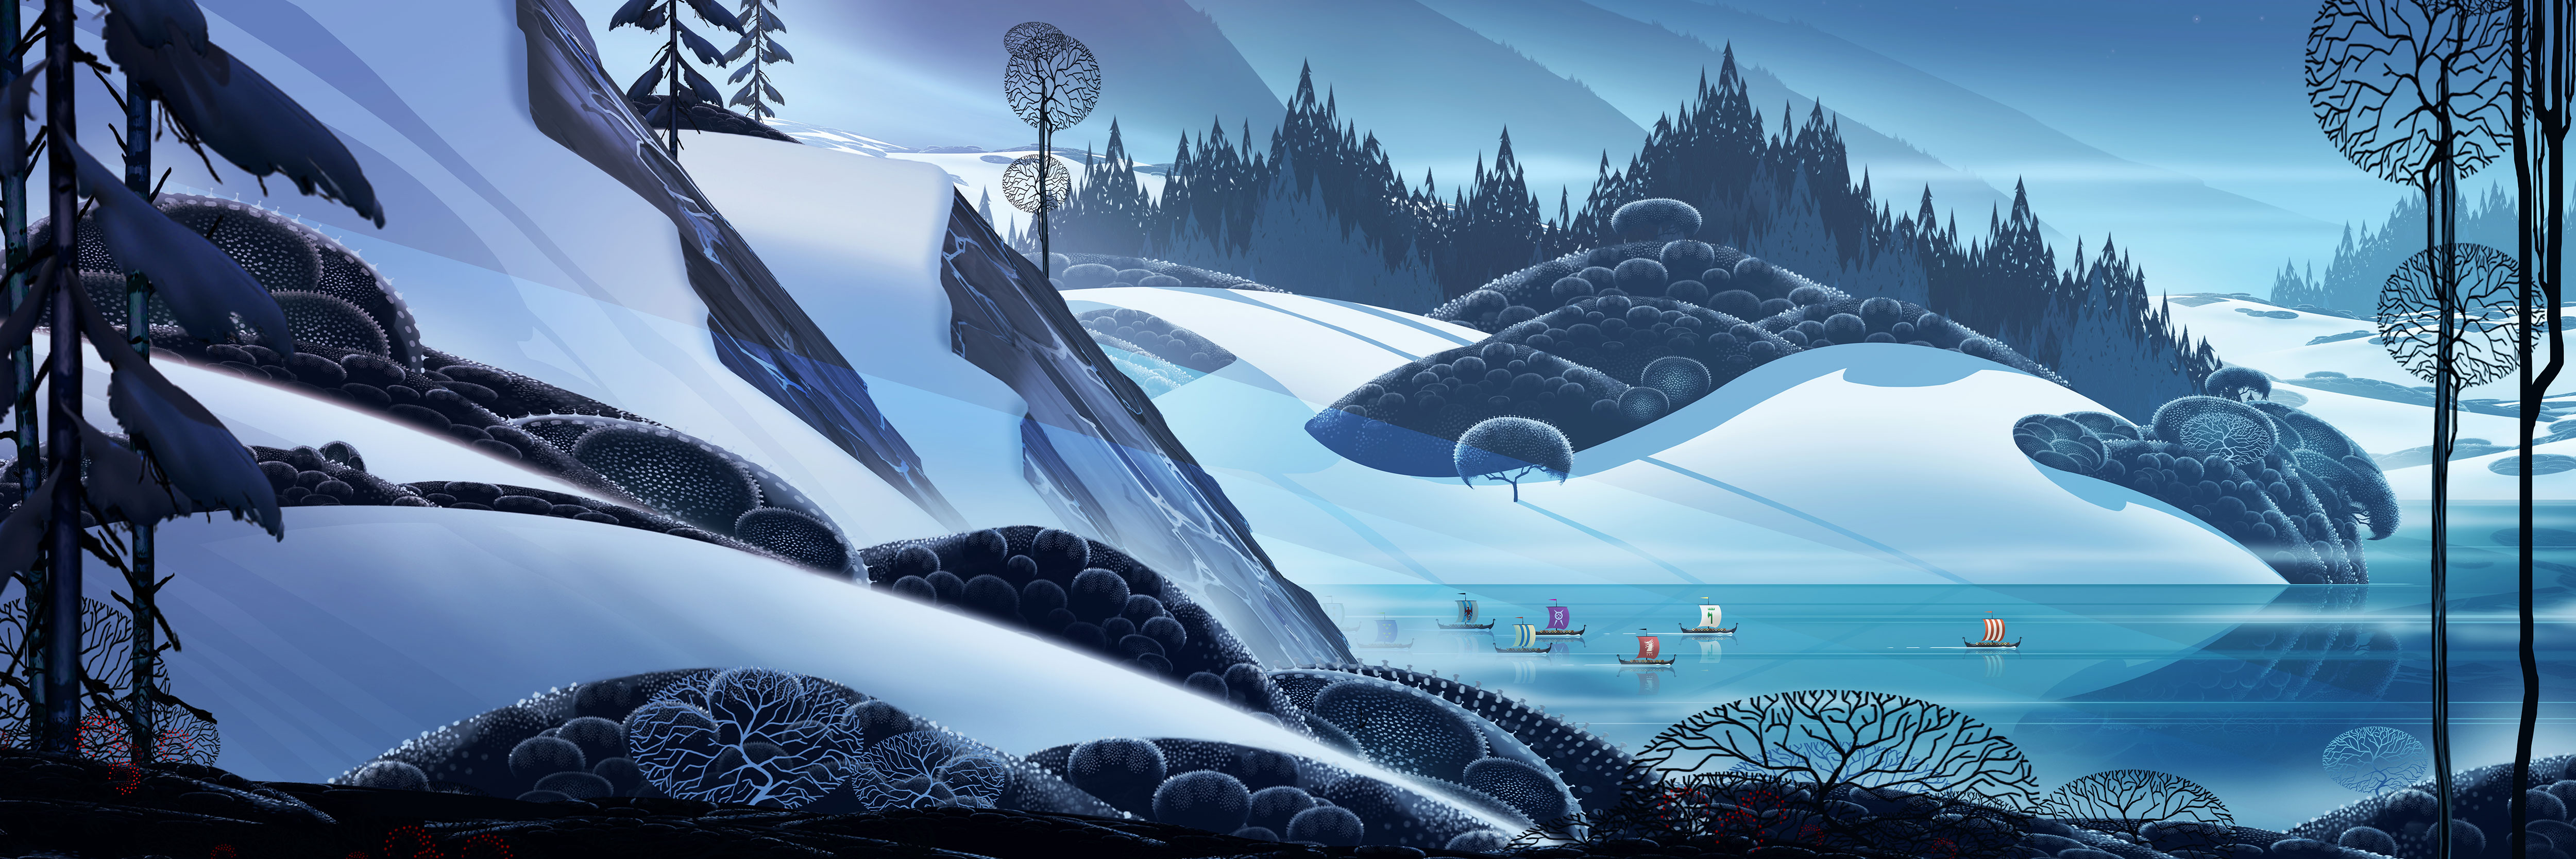 Fine Art Banner Saga Is One Of The Most Beautiful Video Games Ive